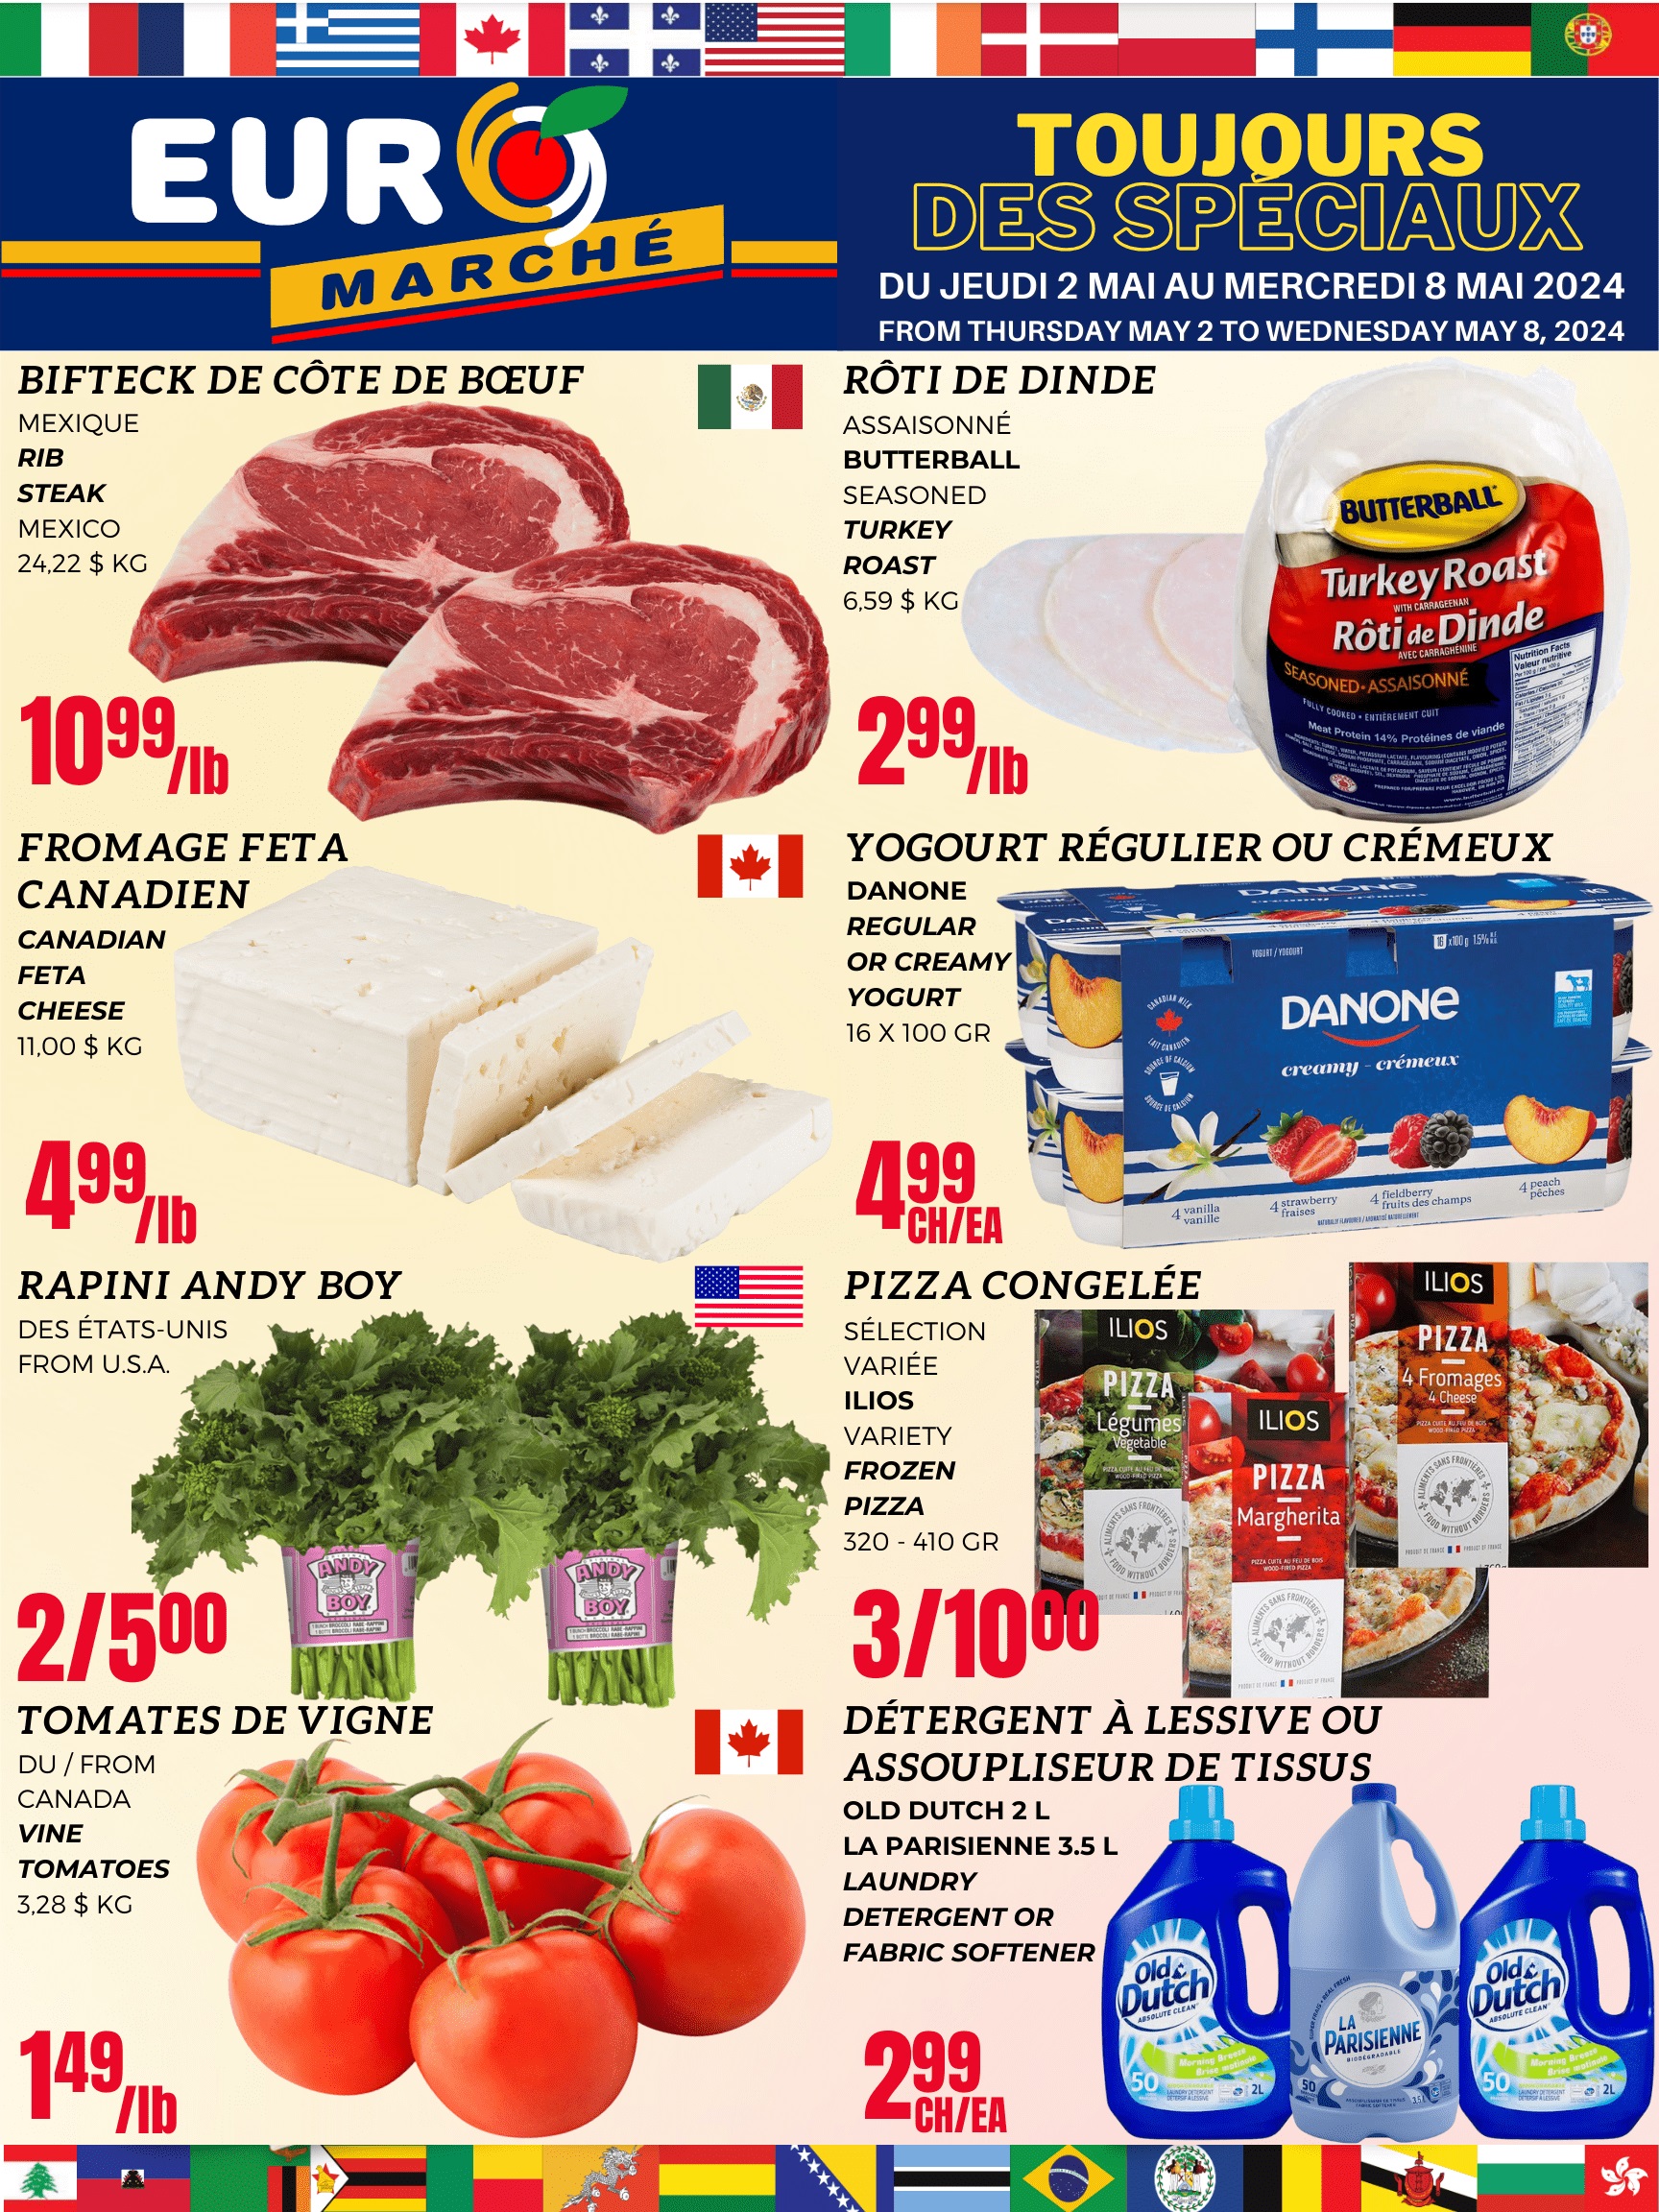 Euromarche - Weekly Flyer Specials